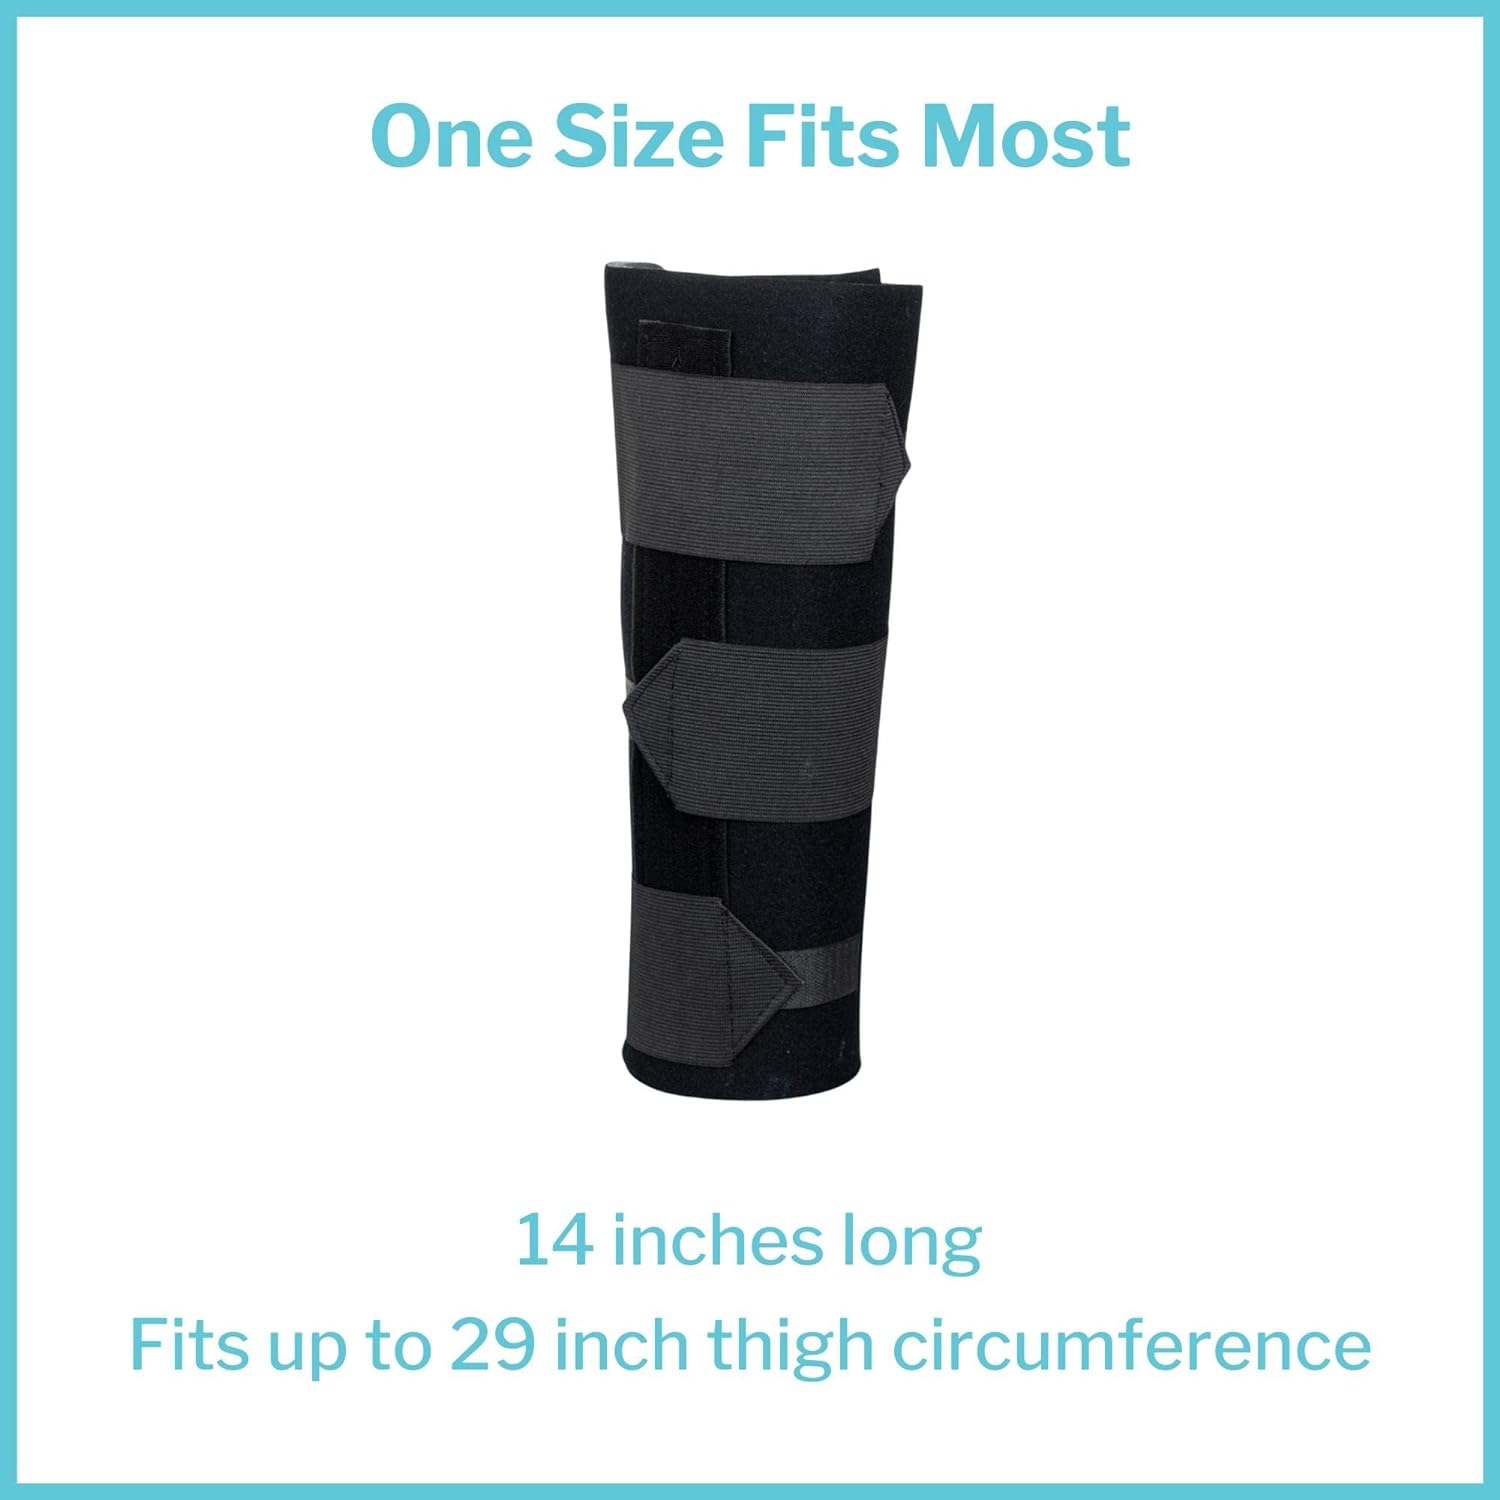 McKesson Knee Immobilizer Brace for Women and Men Adjustable Leg Straightener, One Size Fits Most, 14", 1 Count